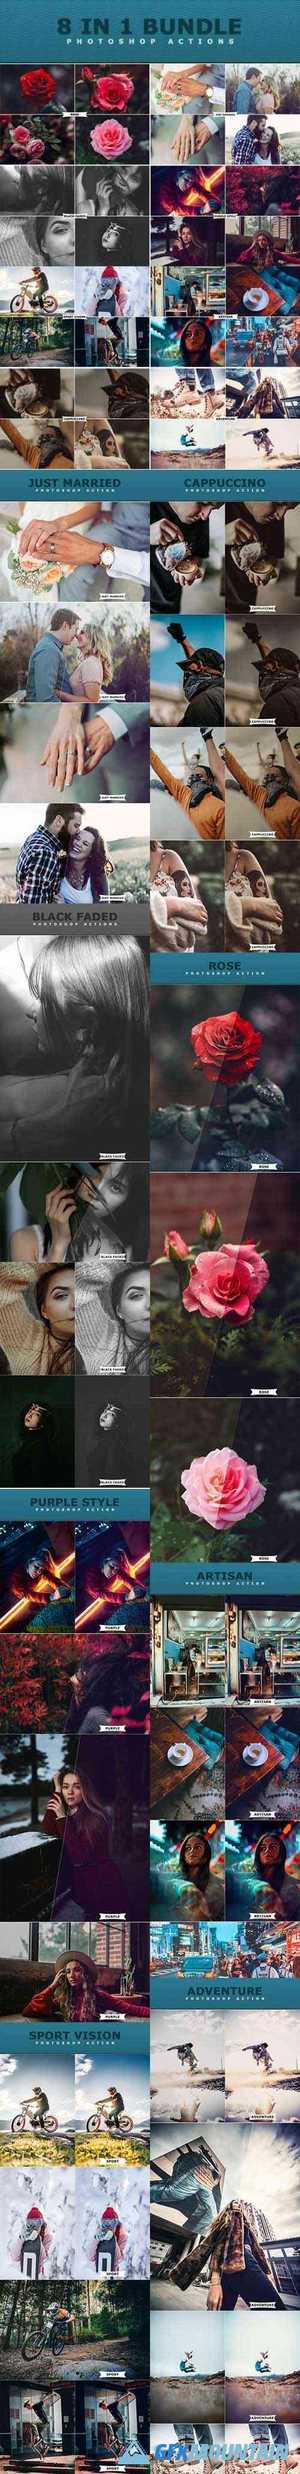 8 IN 1 Photoshop Actions Bundle 27450364